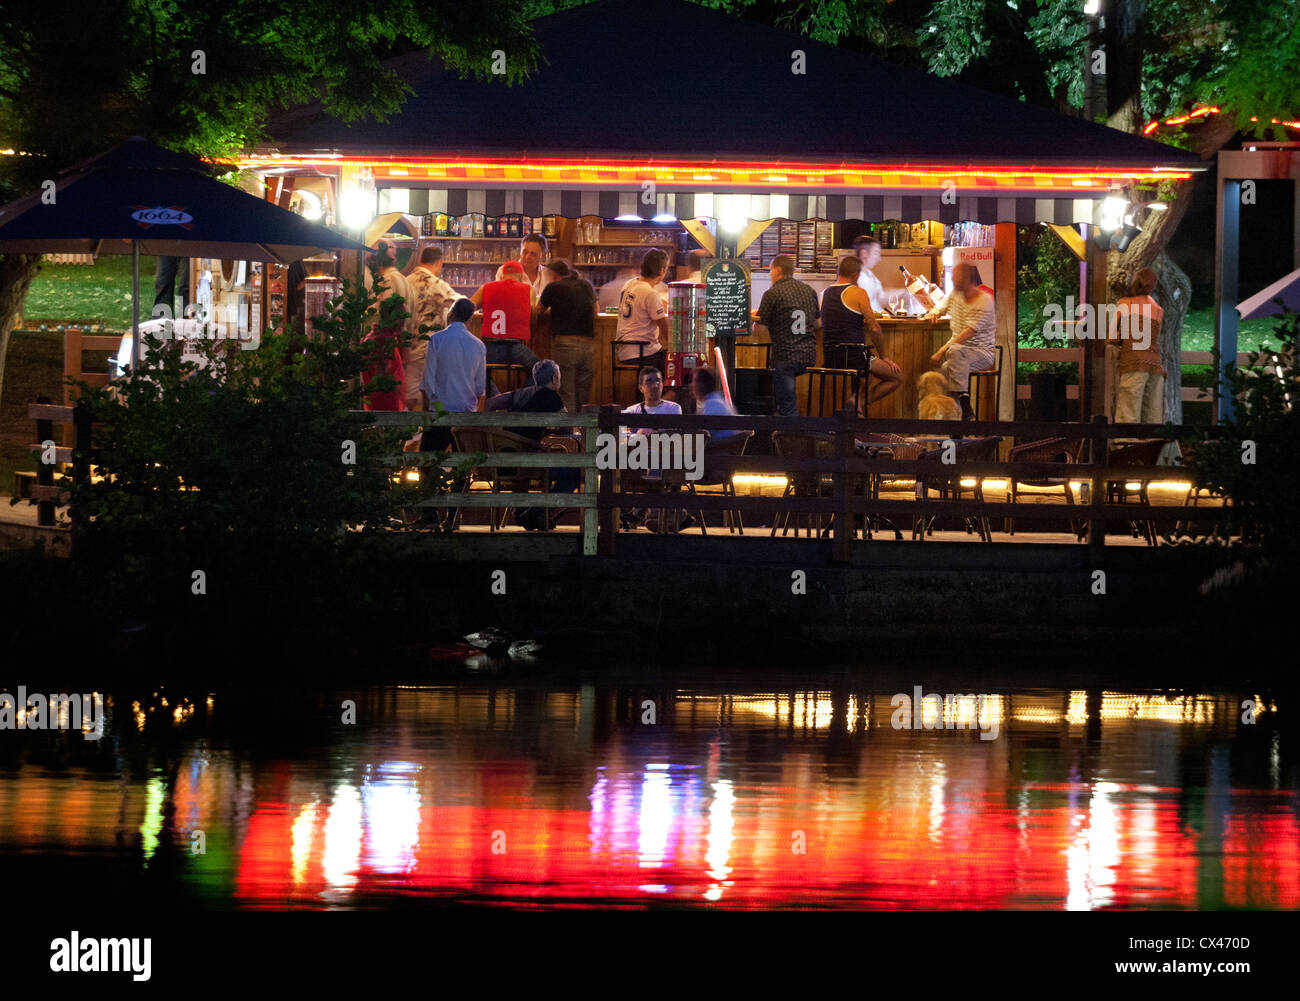 On the right bank of the Allier Lake, the terrace of the 'Tahiti Beach' bar (Vichy - France). Le bar 'Tahiti Plage' à Vichy. Stock Photo